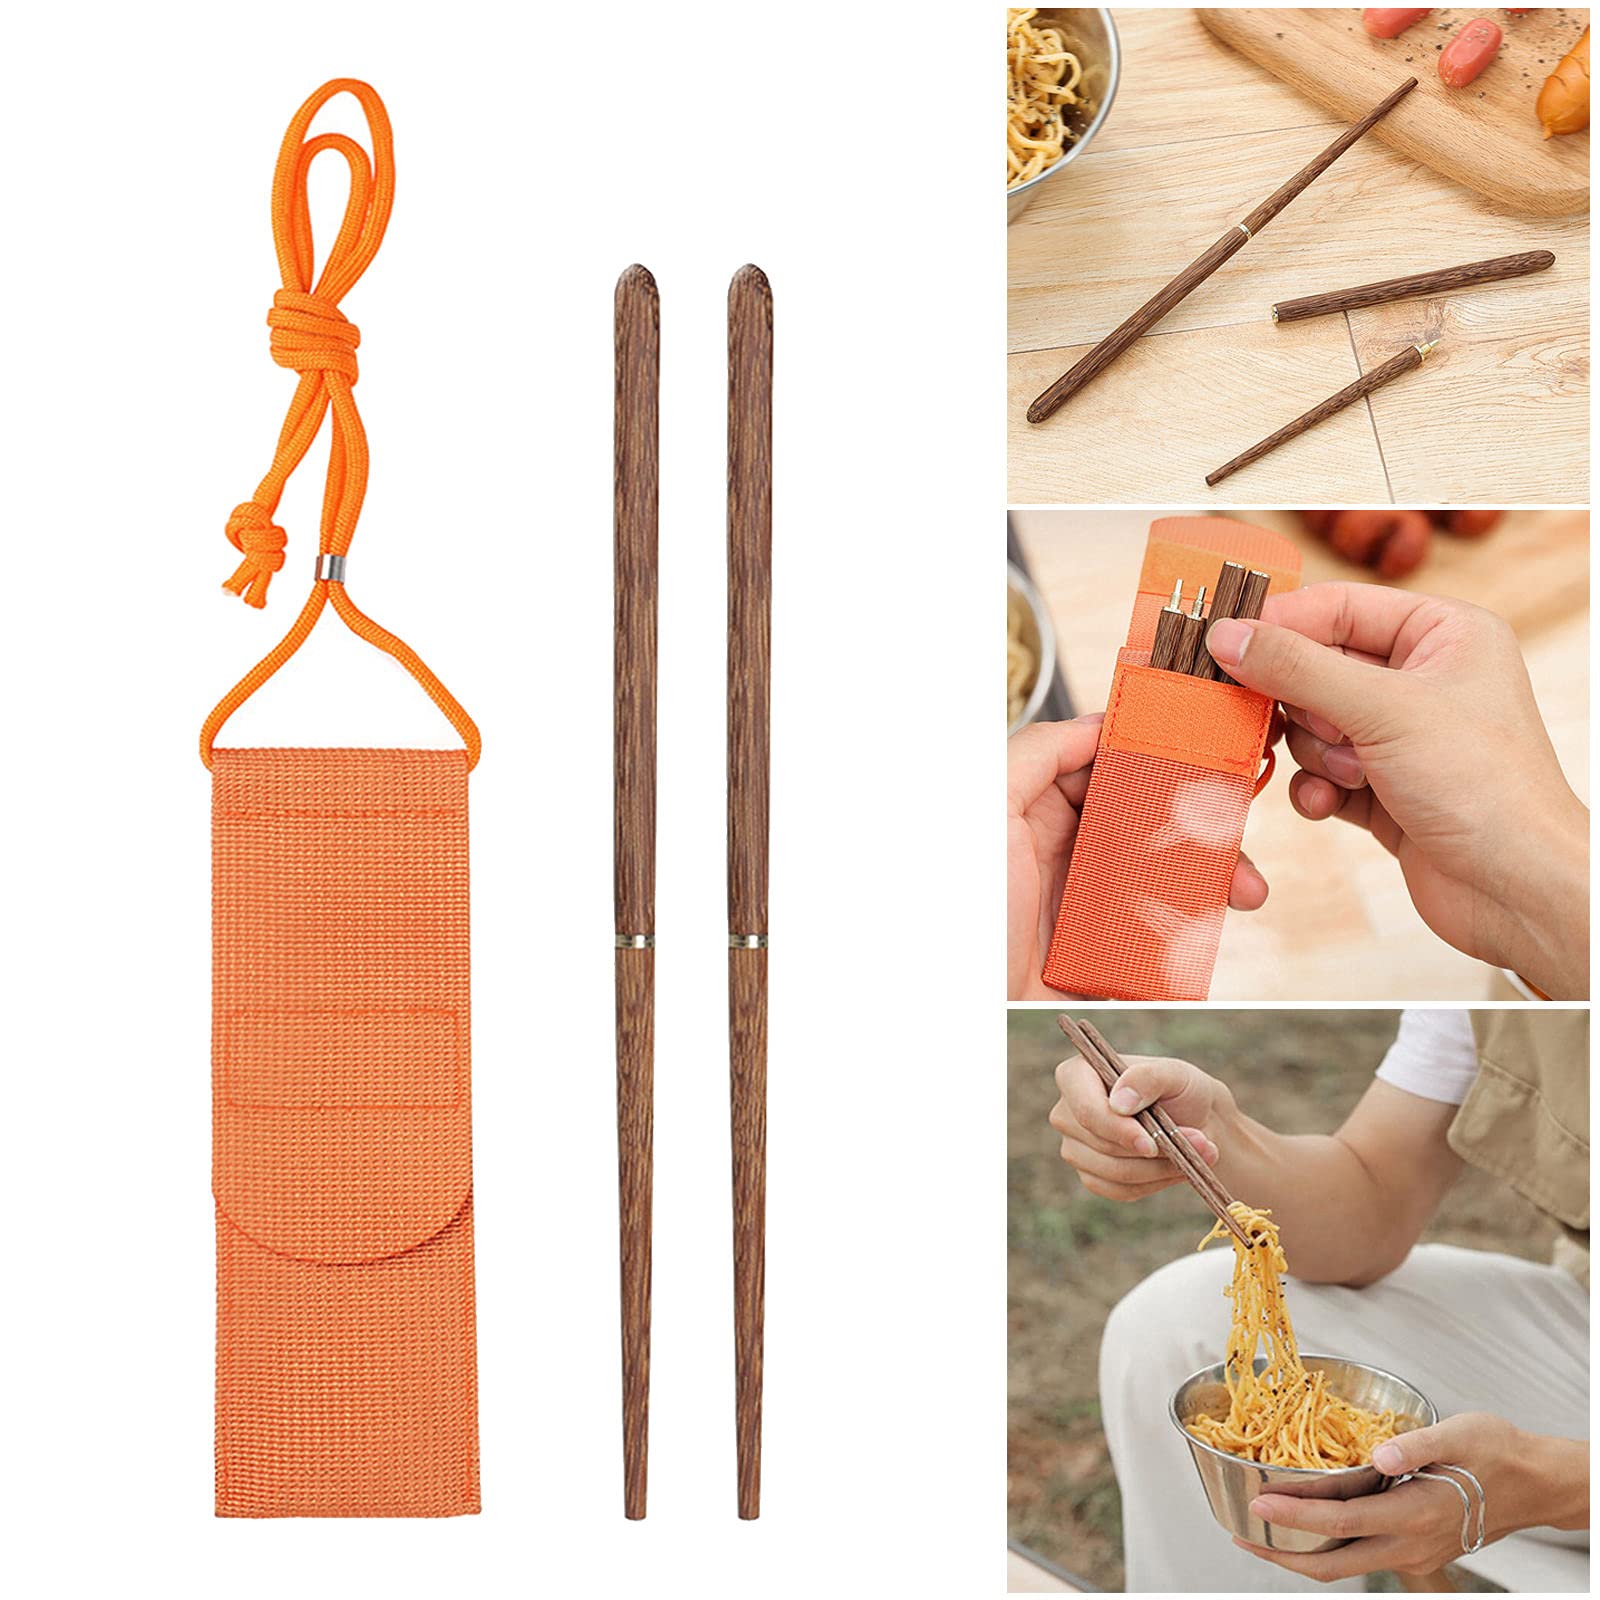 Fenteer Stainless Steel Chopsticks Screw in/Apart Reusable Travel Foldable Chopsticks with Pouch, Full Wood